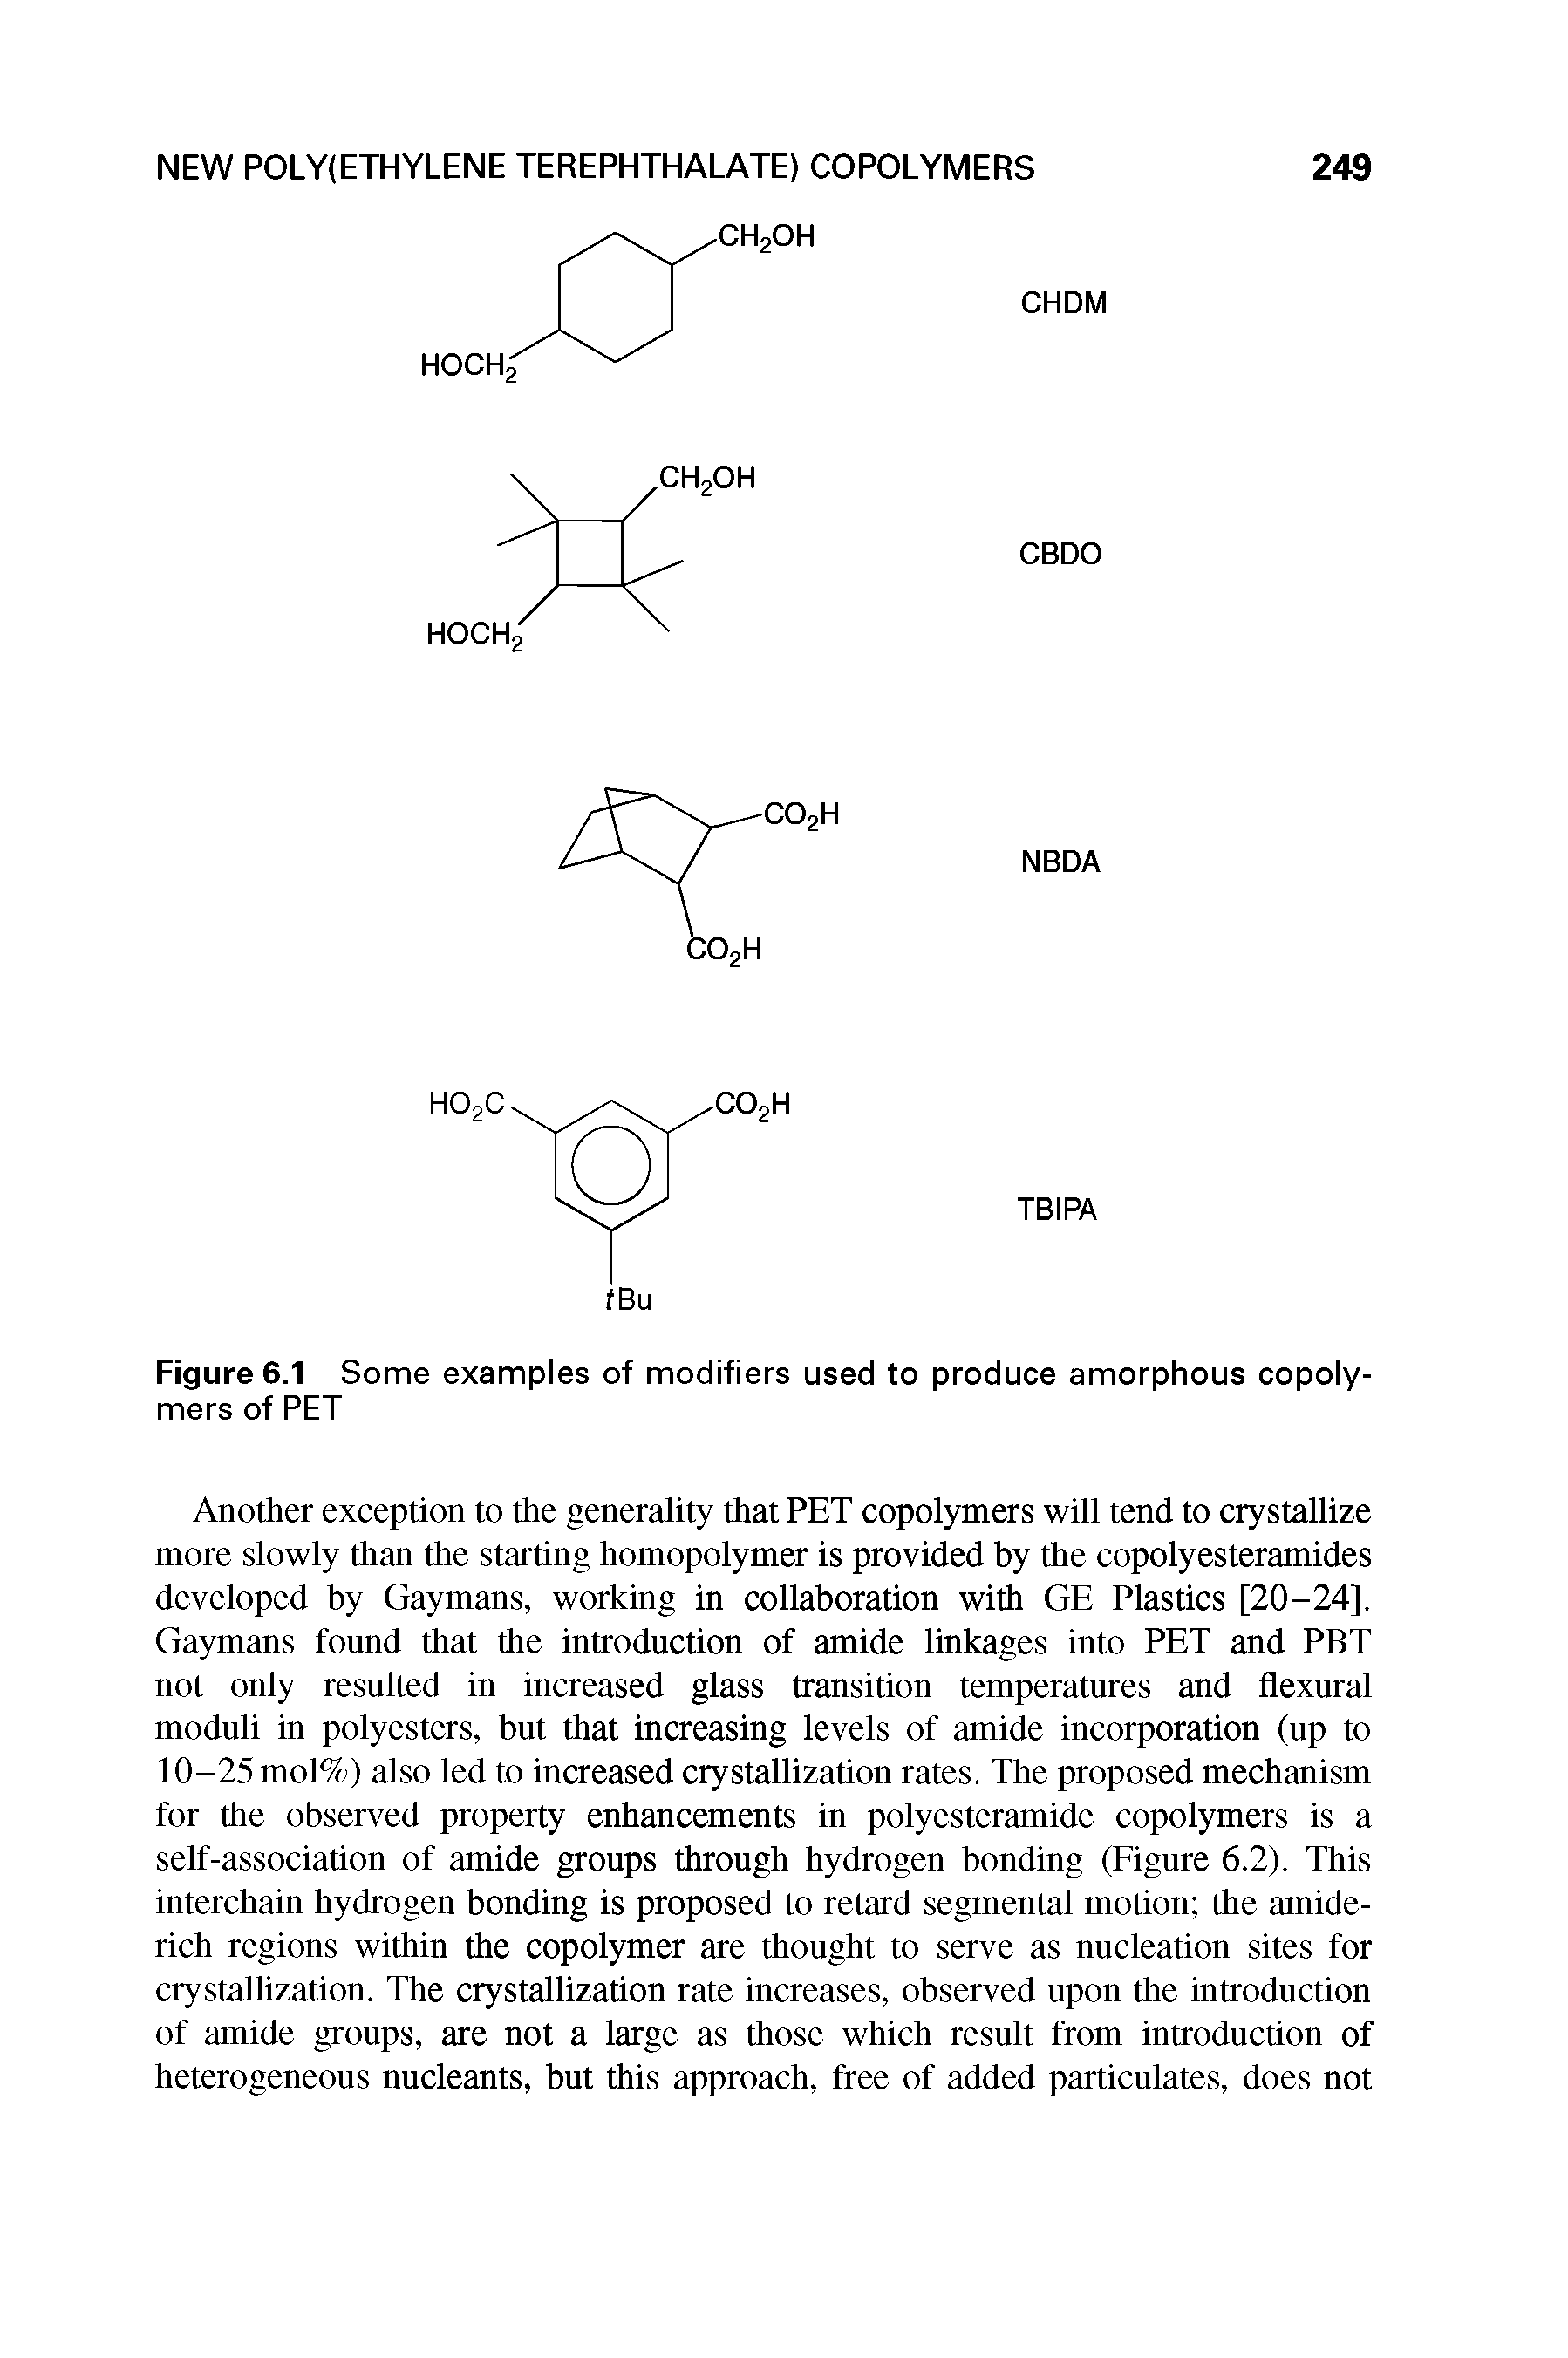 Figure 6.1 Some examples of modifiers used to produce amorphous copolymers of PET...